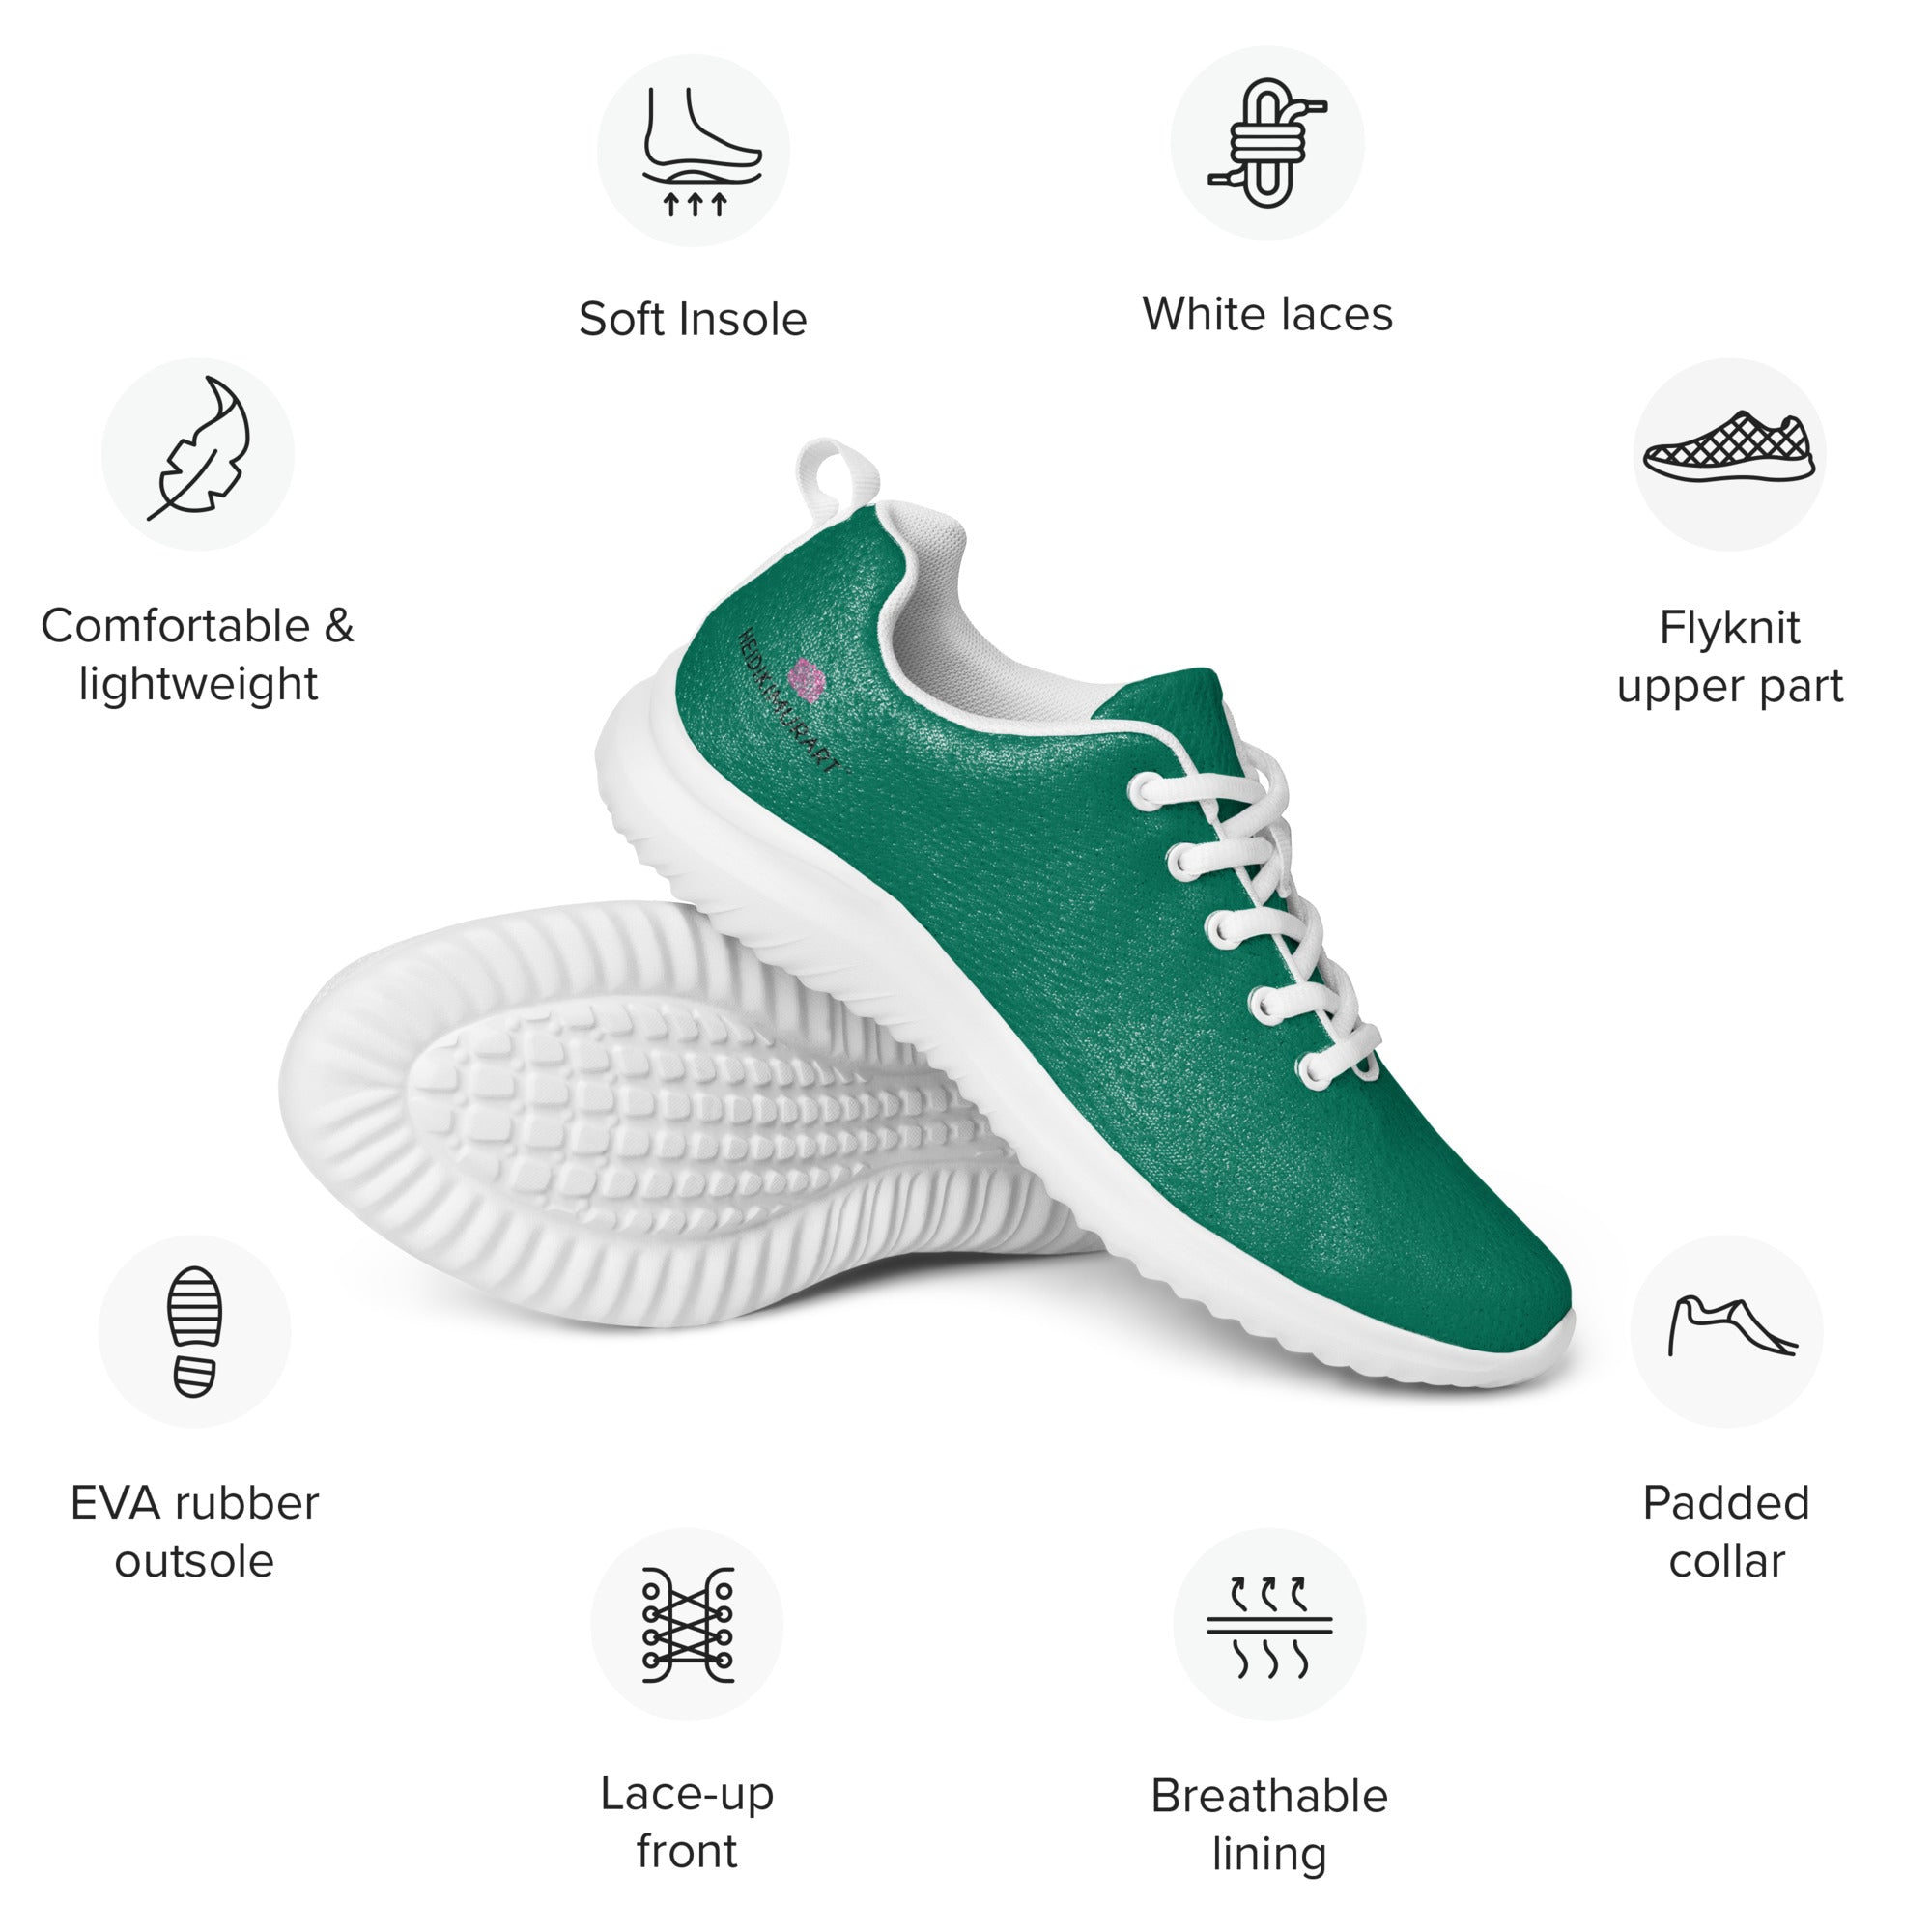 Green&nbsp;Solid Color Men's Sneakers, Solid Color Modern Breathable Lightweight Best Premium Designer Men’s Lace-up Low Top Sneakers, Modern Essential Classic Every Day Best Quality Fashionable Running Casual Canvas Breathable Comfortable Running Shoes With White Laces and Padded Tongues and Thick Outsoles (US Size: 5-13)